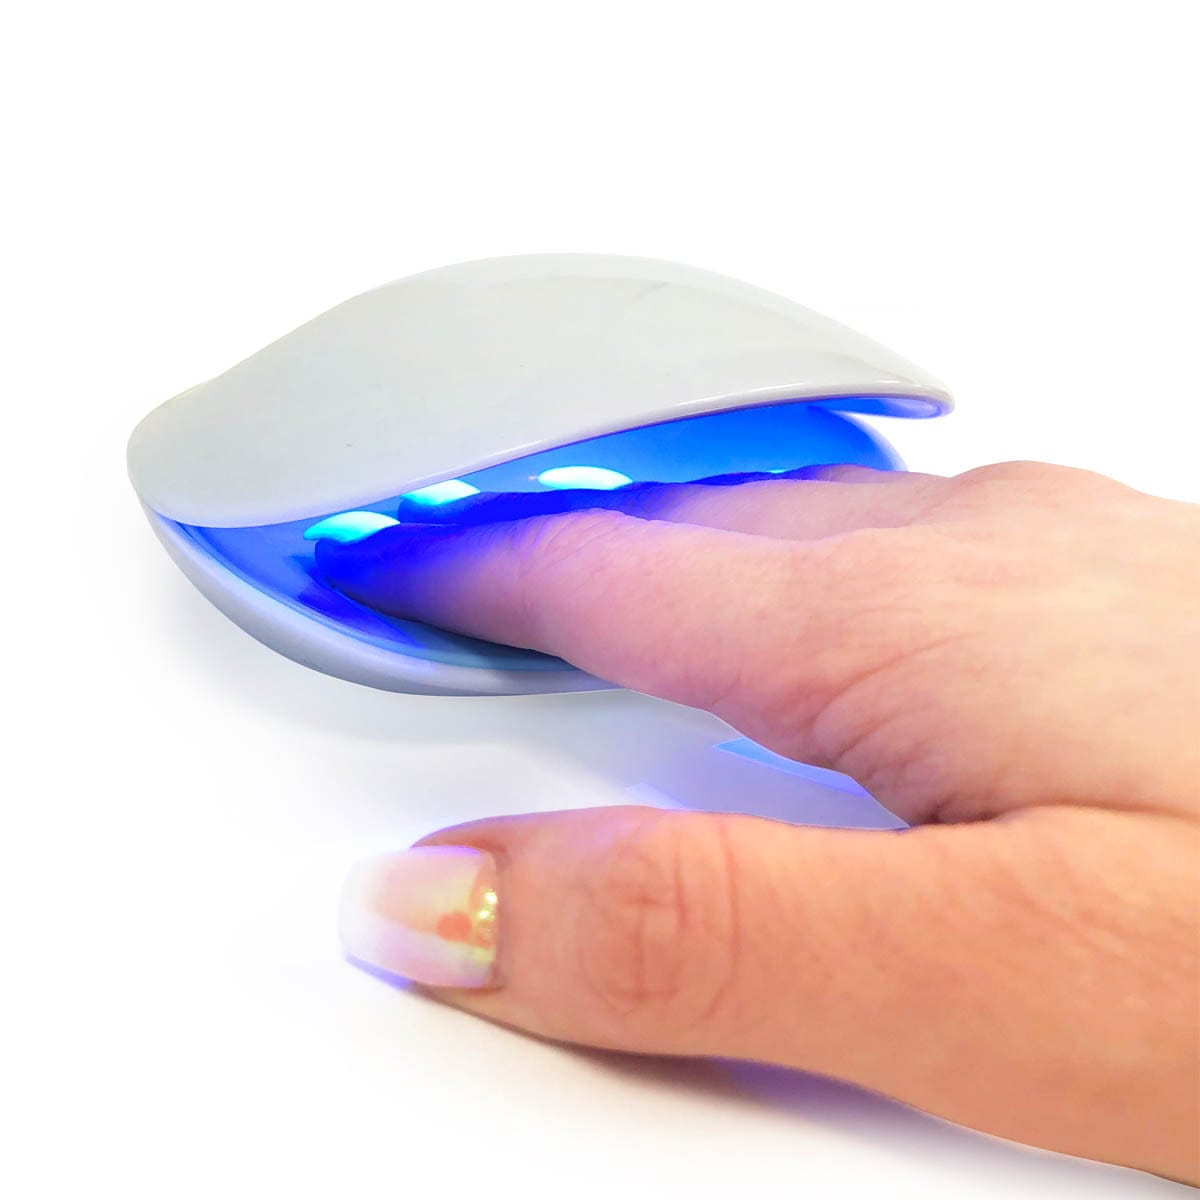 nail curing lamp with fingers in